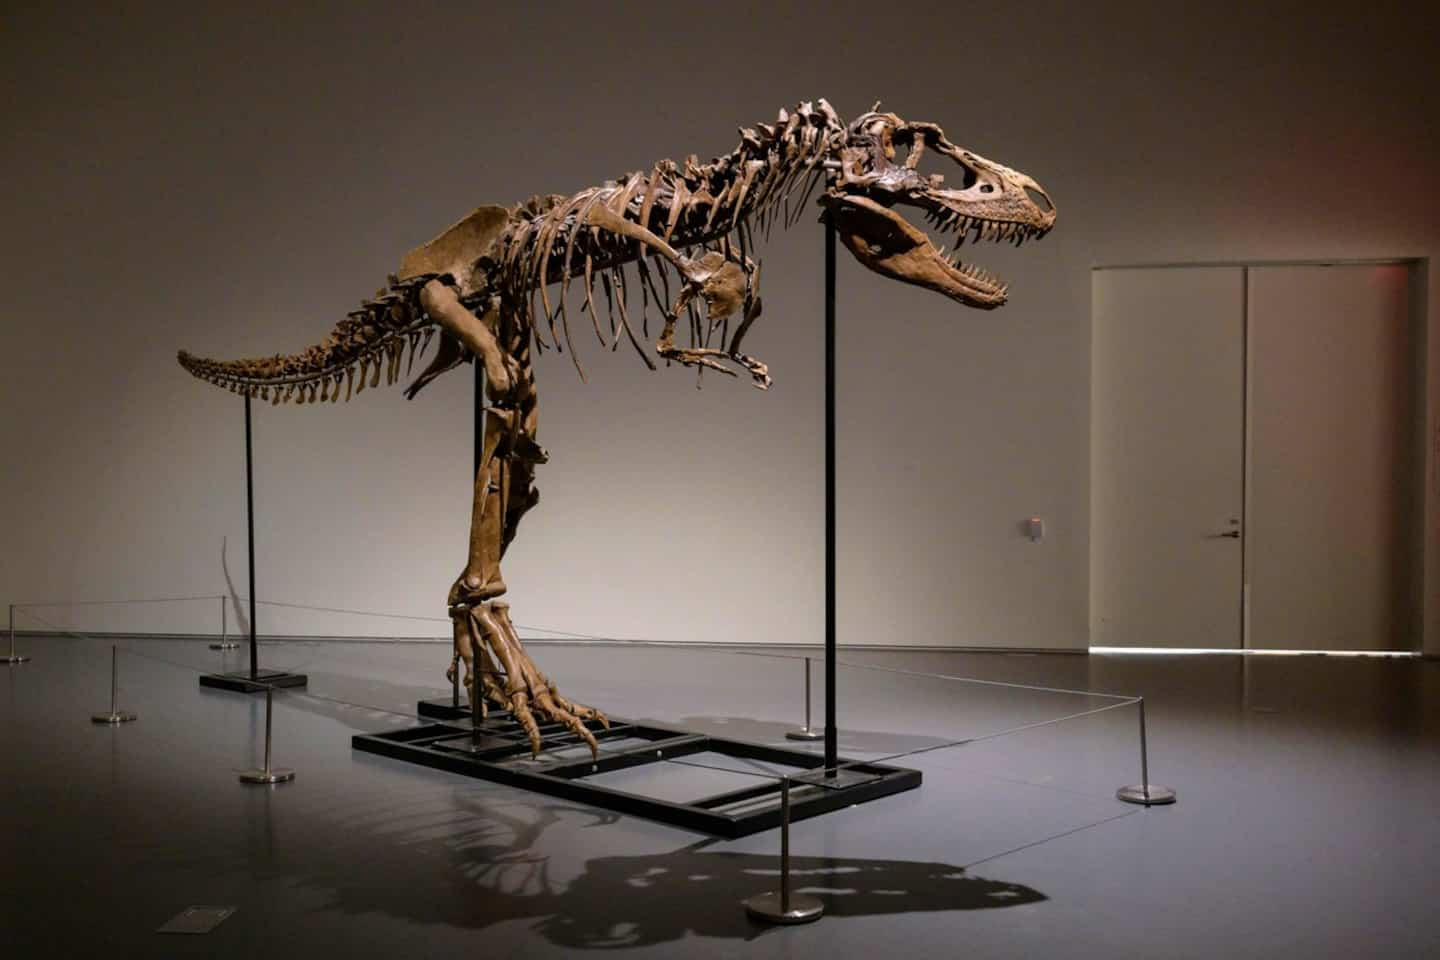 A rare dinosaur skeleton soon to be auctioned in New York